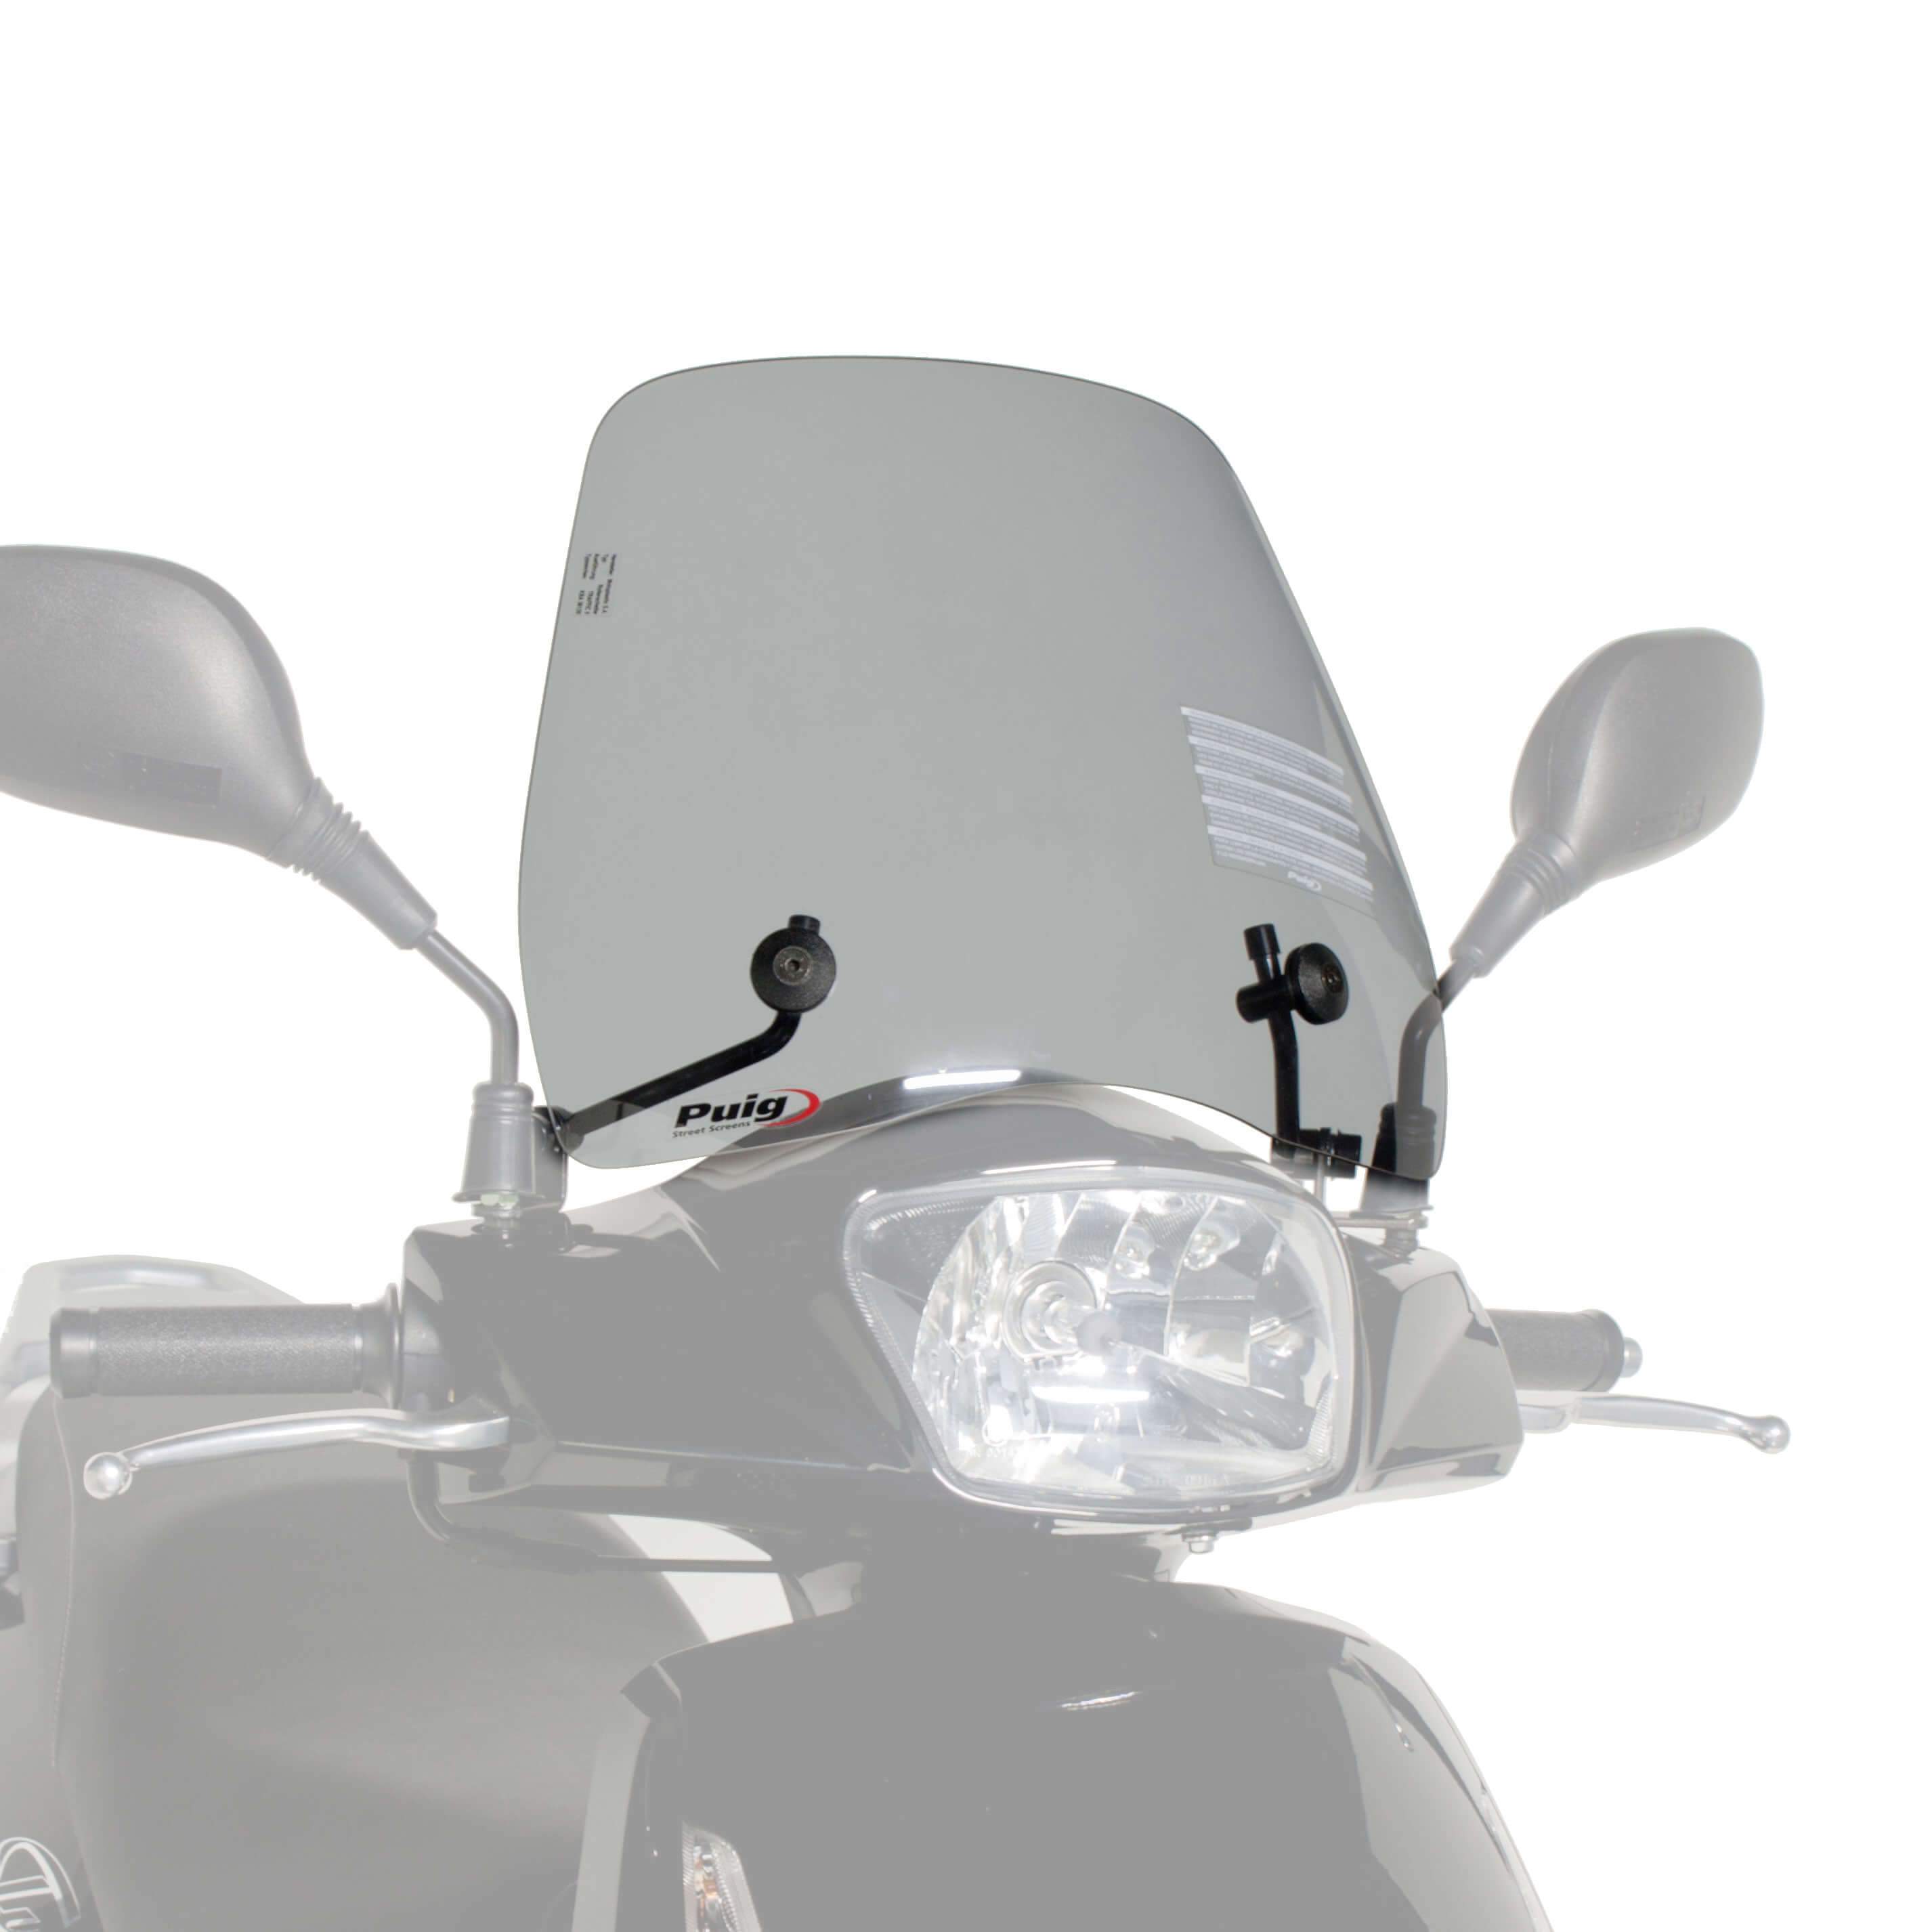 Puig Trafic Screen | Light Smoke | Peugeot Tweet 125 Evo RS 2012>Current-M5874H-Screens-Pyramid Motorcycle Accessories